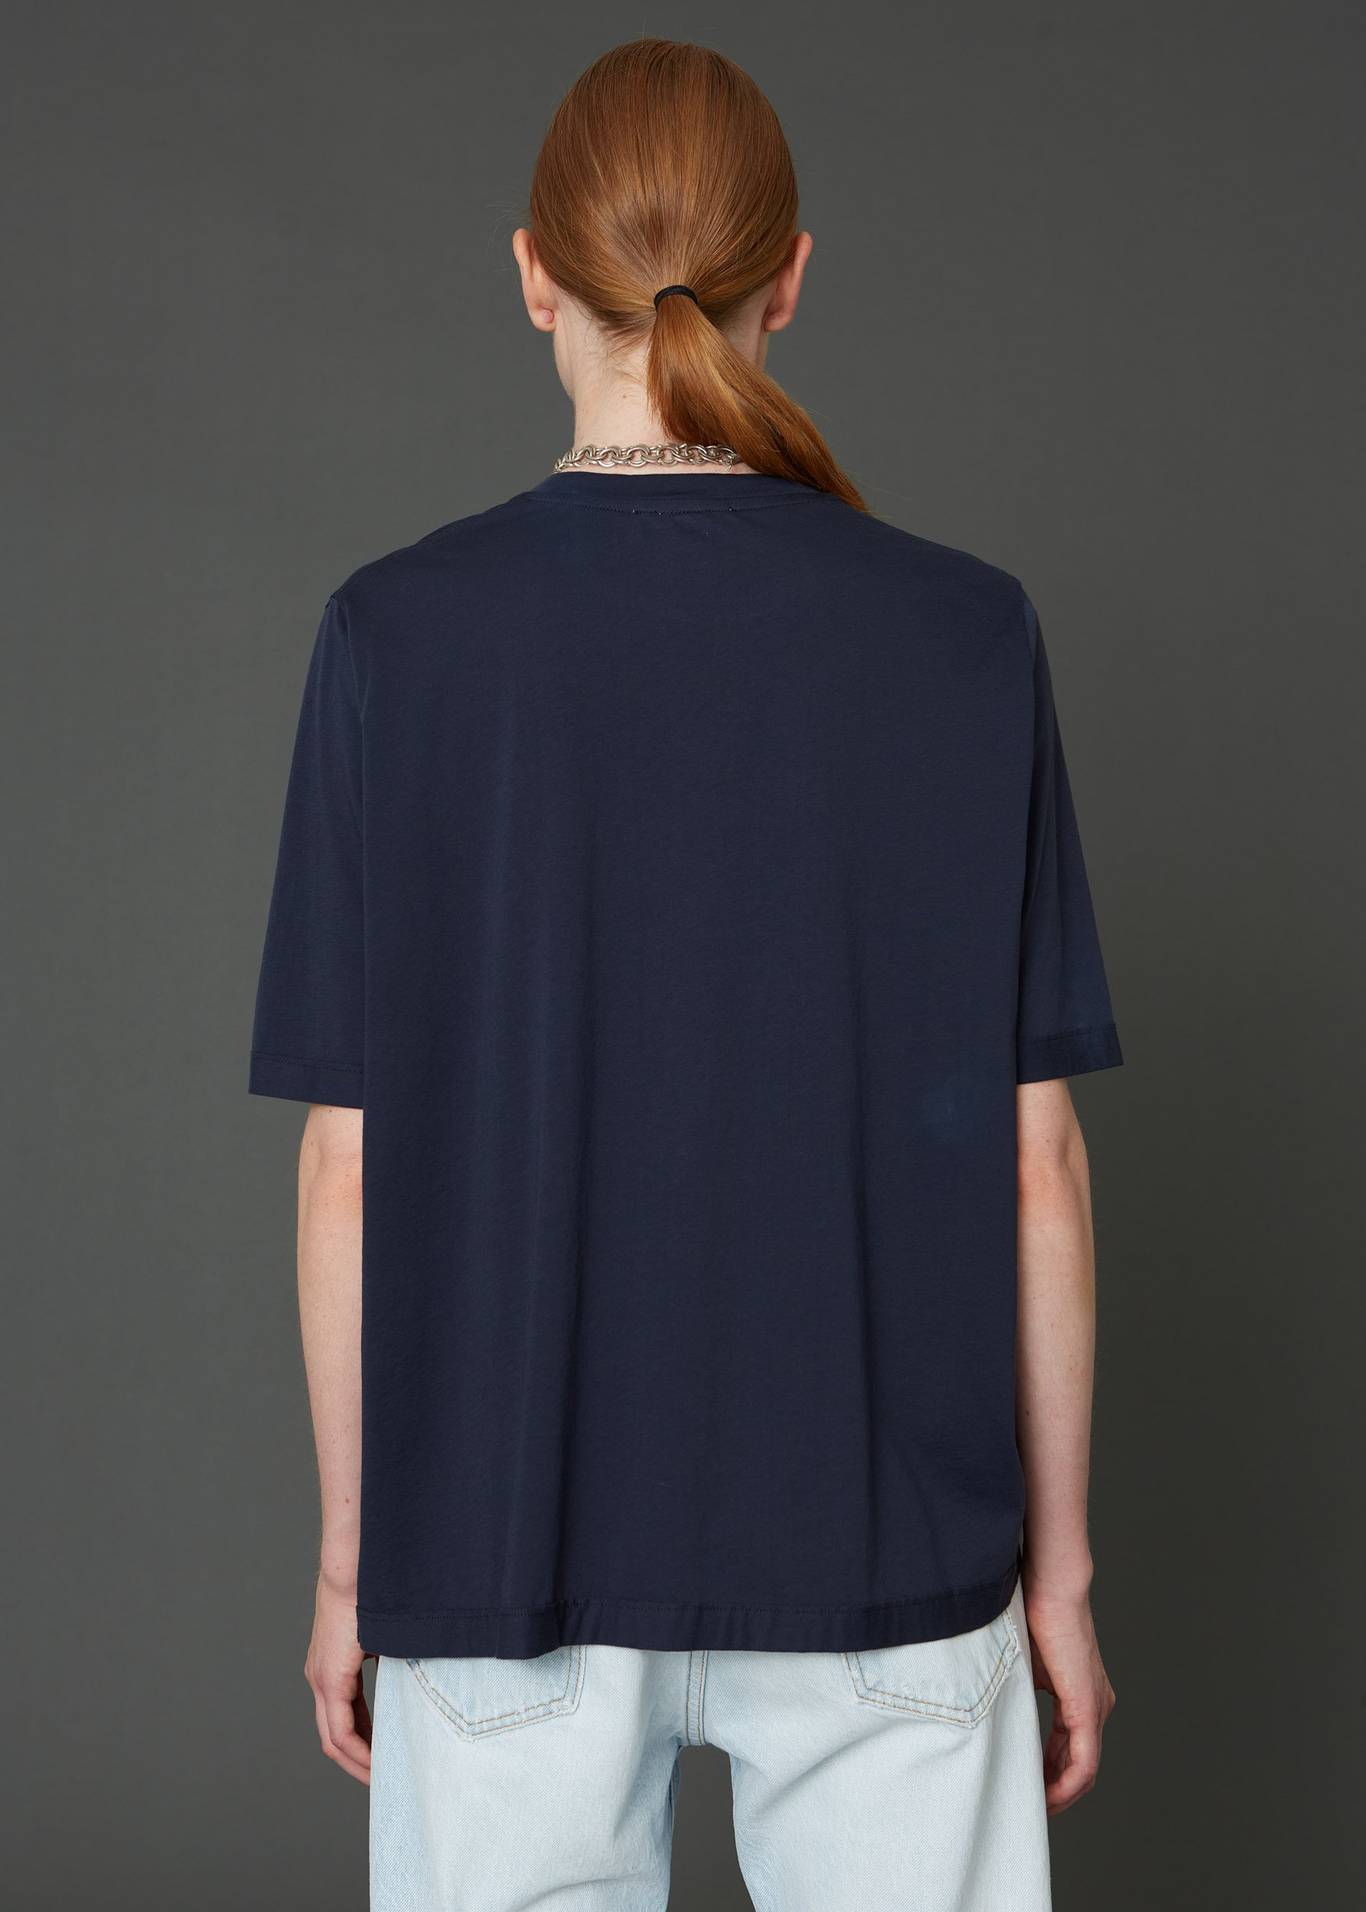 Oh tee in navy by Hope